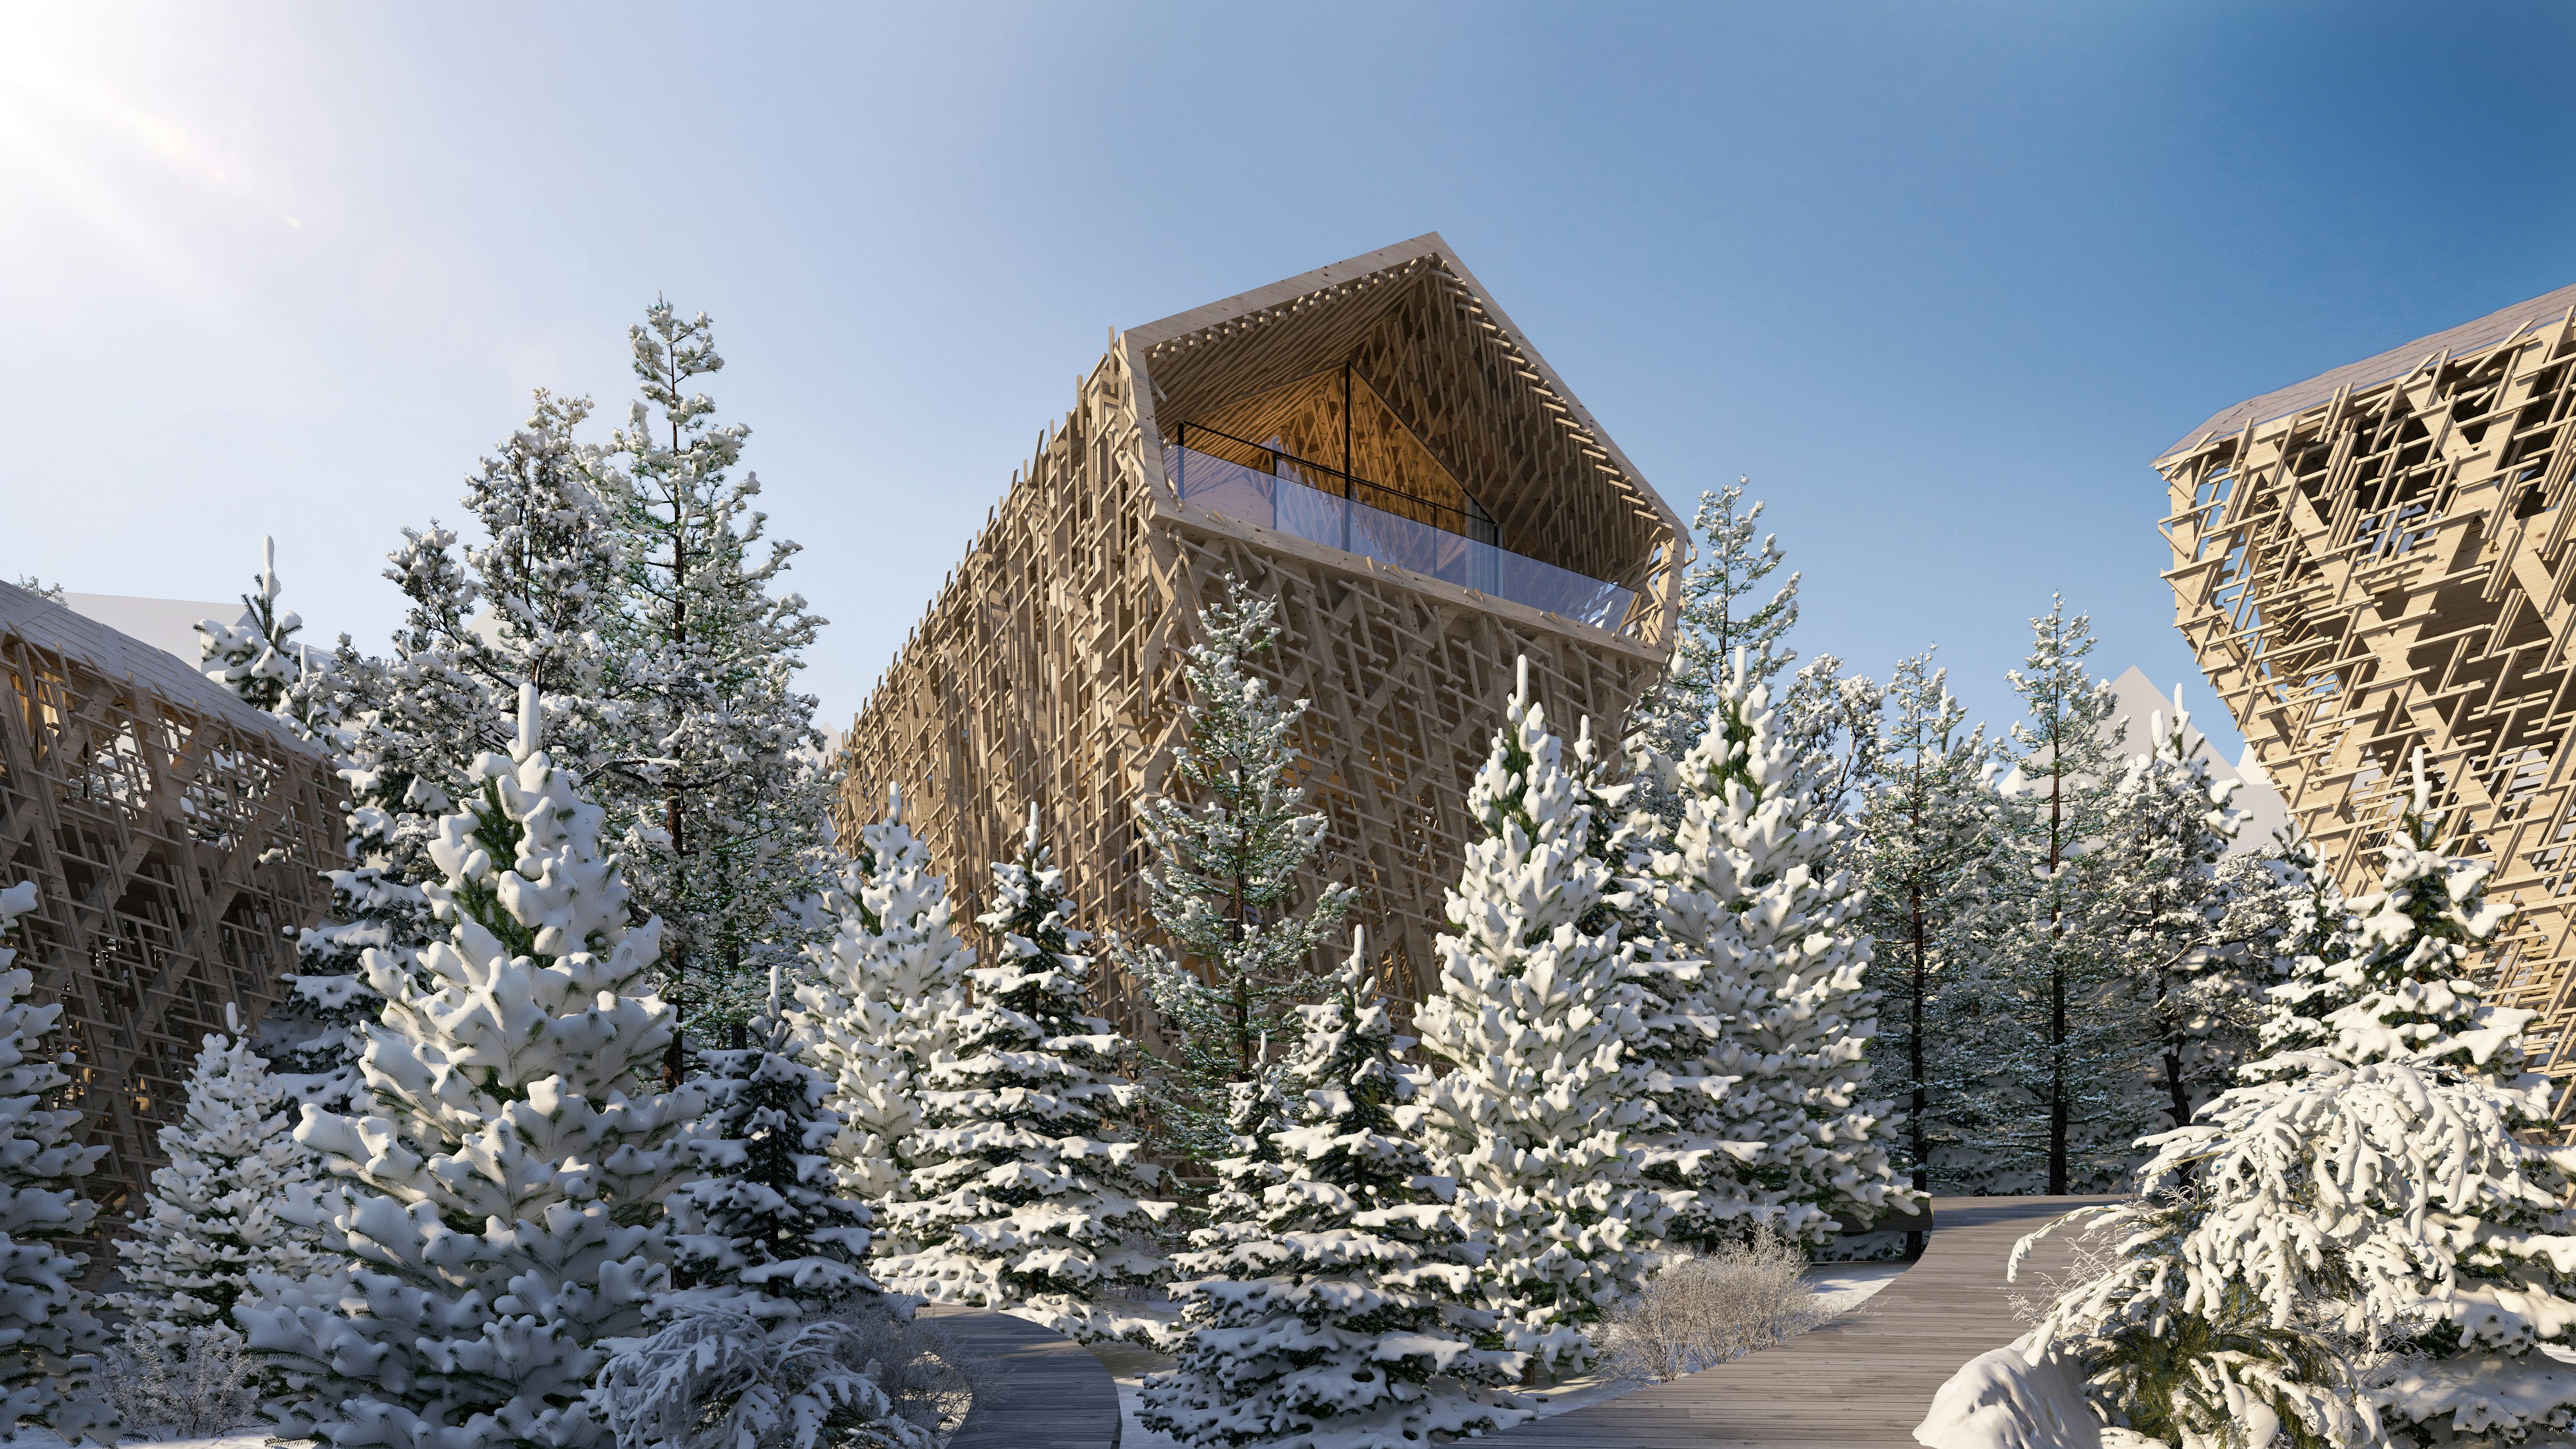 A rendering of the treehouses in the middle of a snowy forest in bright daylight